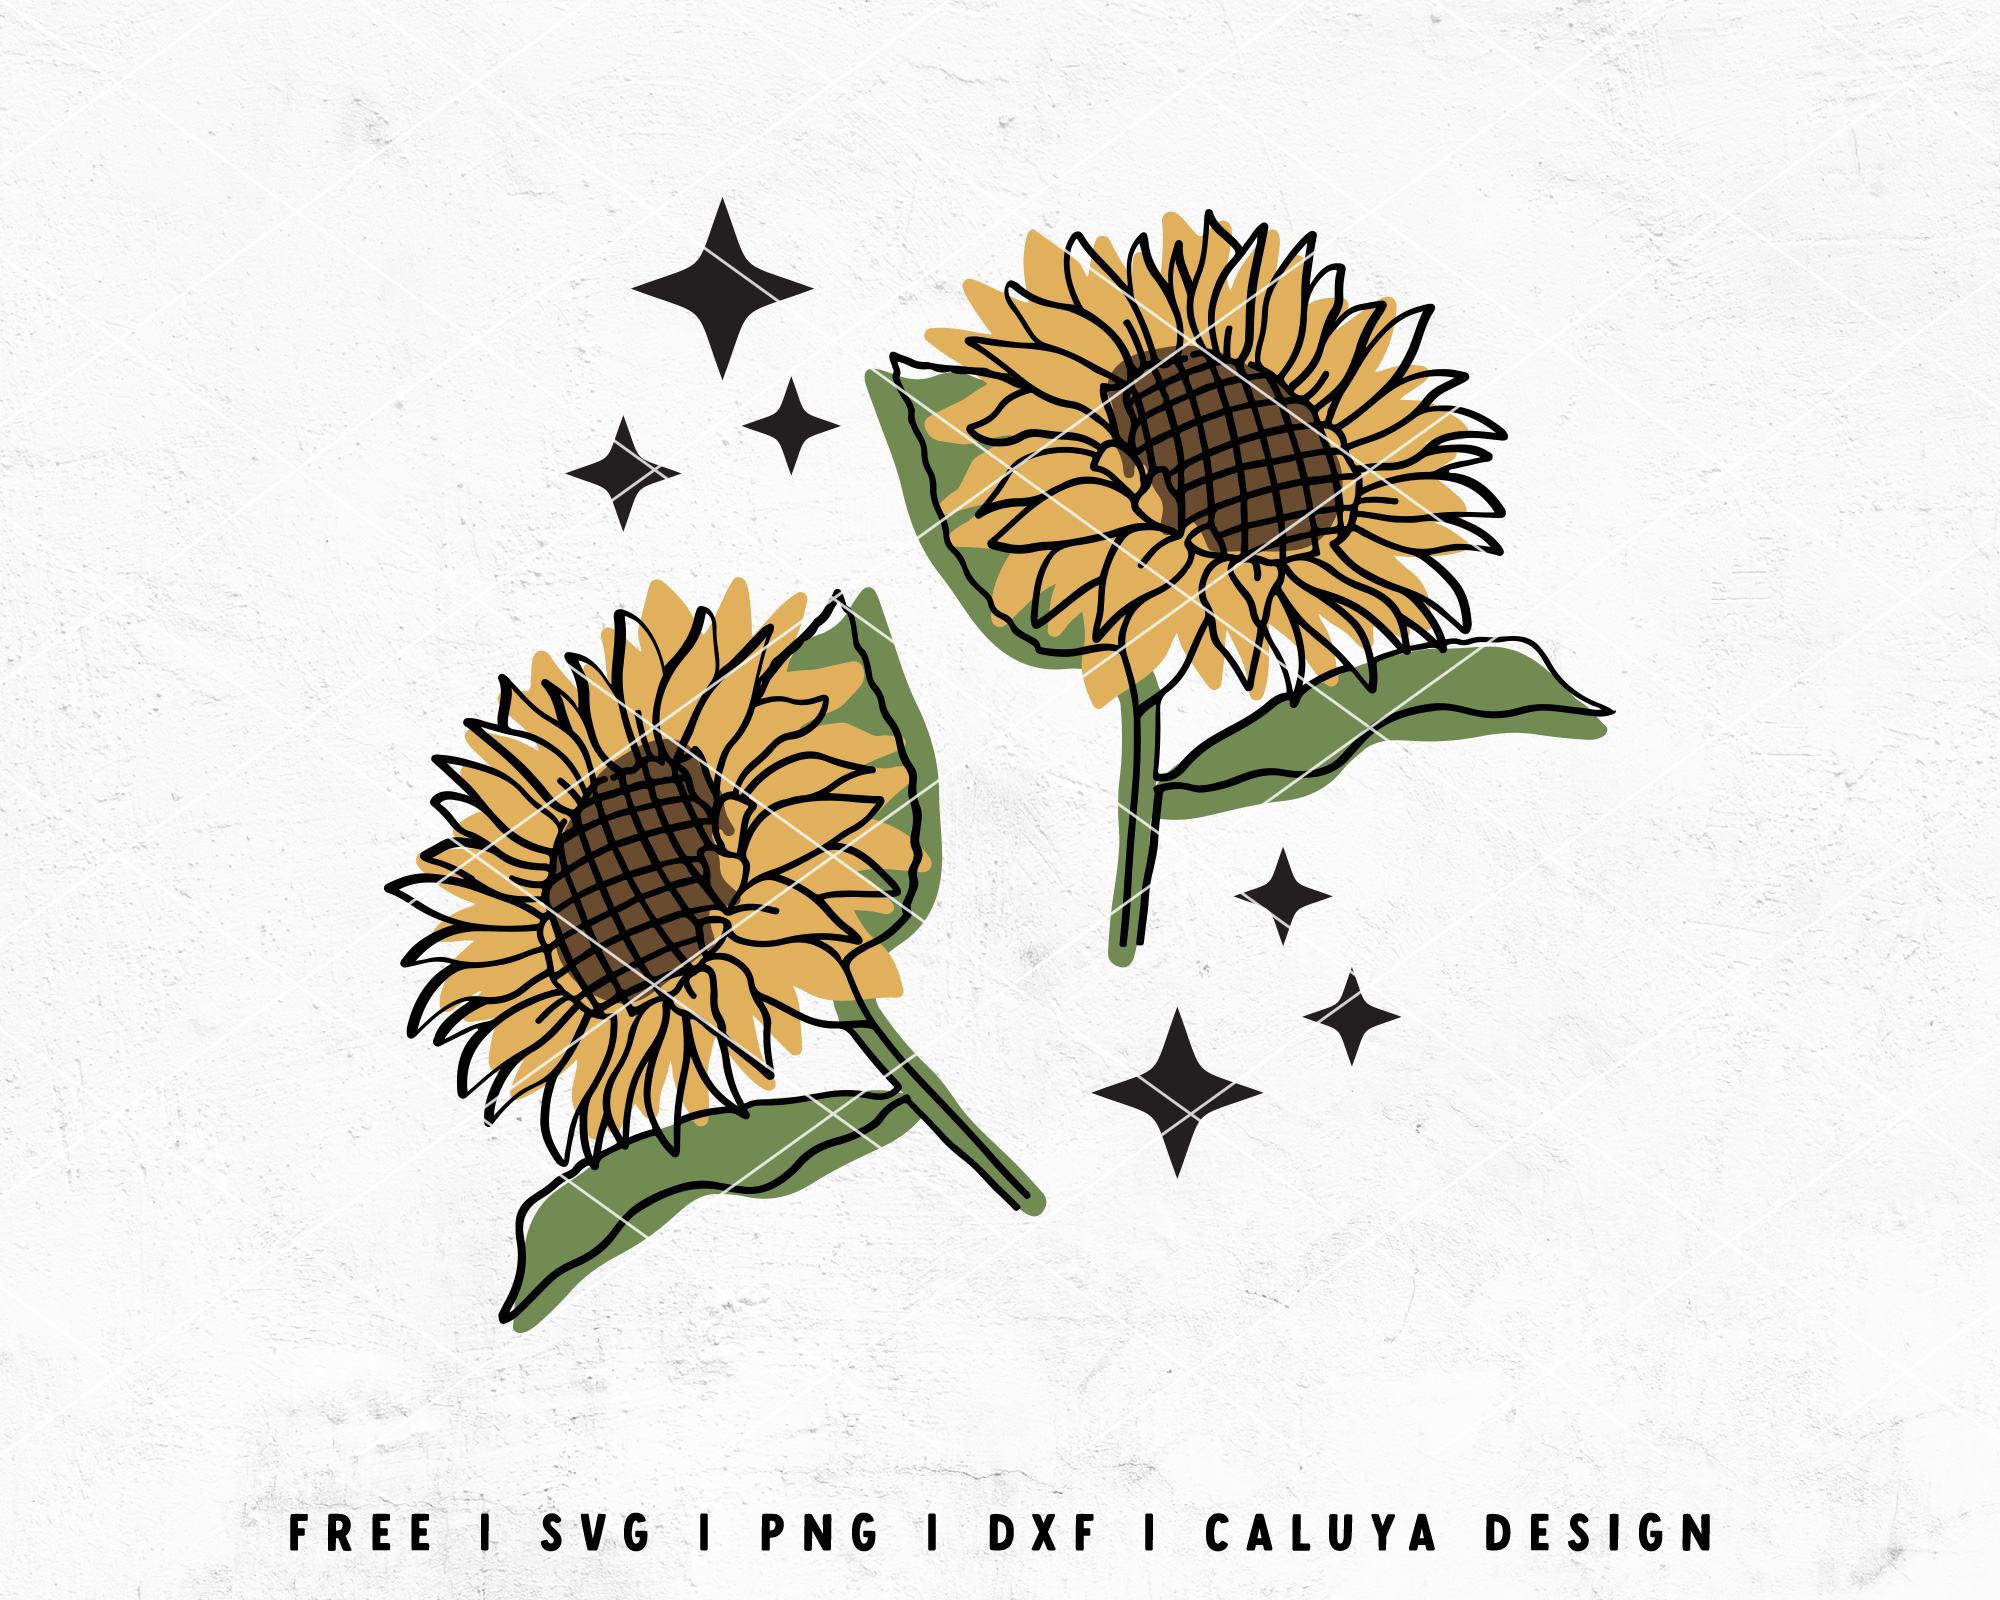 Sunflowers Drawing Sunflower svg Sunflower Silhouette png